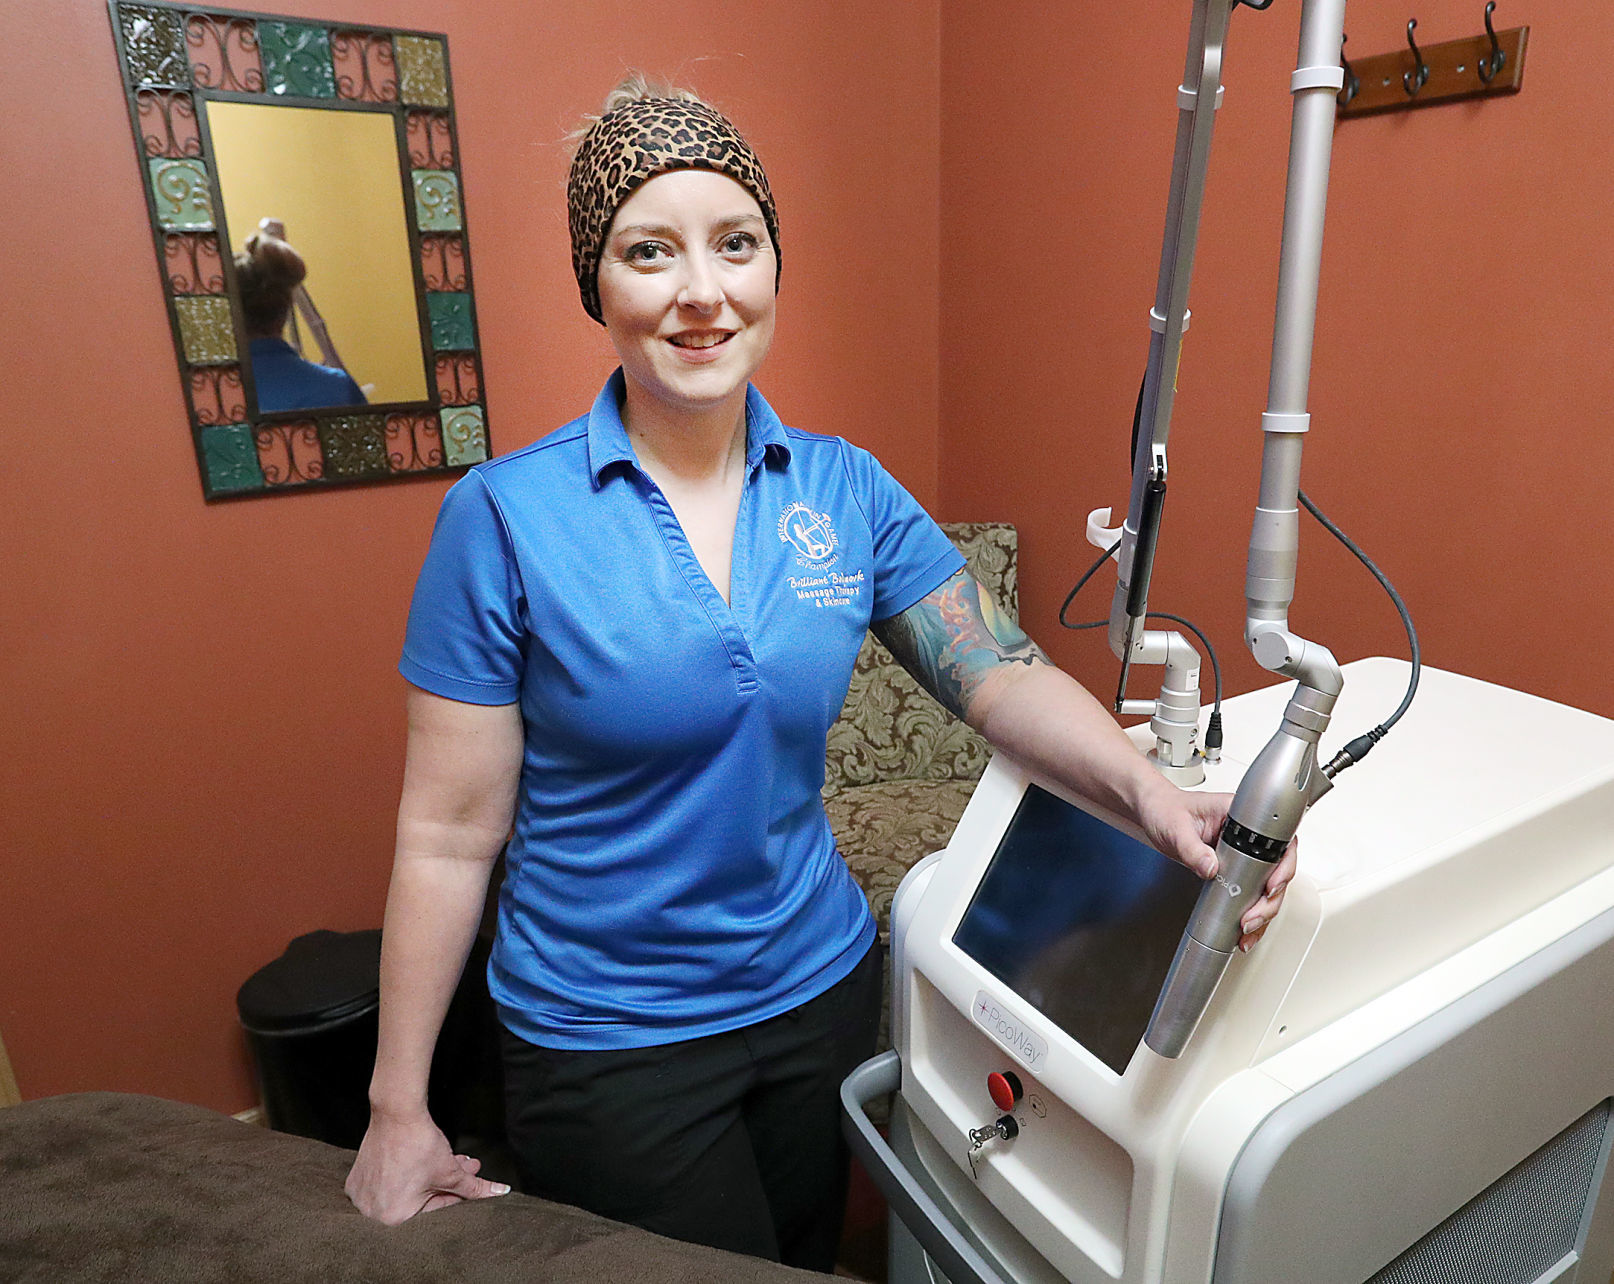 Onalaska business owner offers fresh start to abuse victims through tattoo removal pic